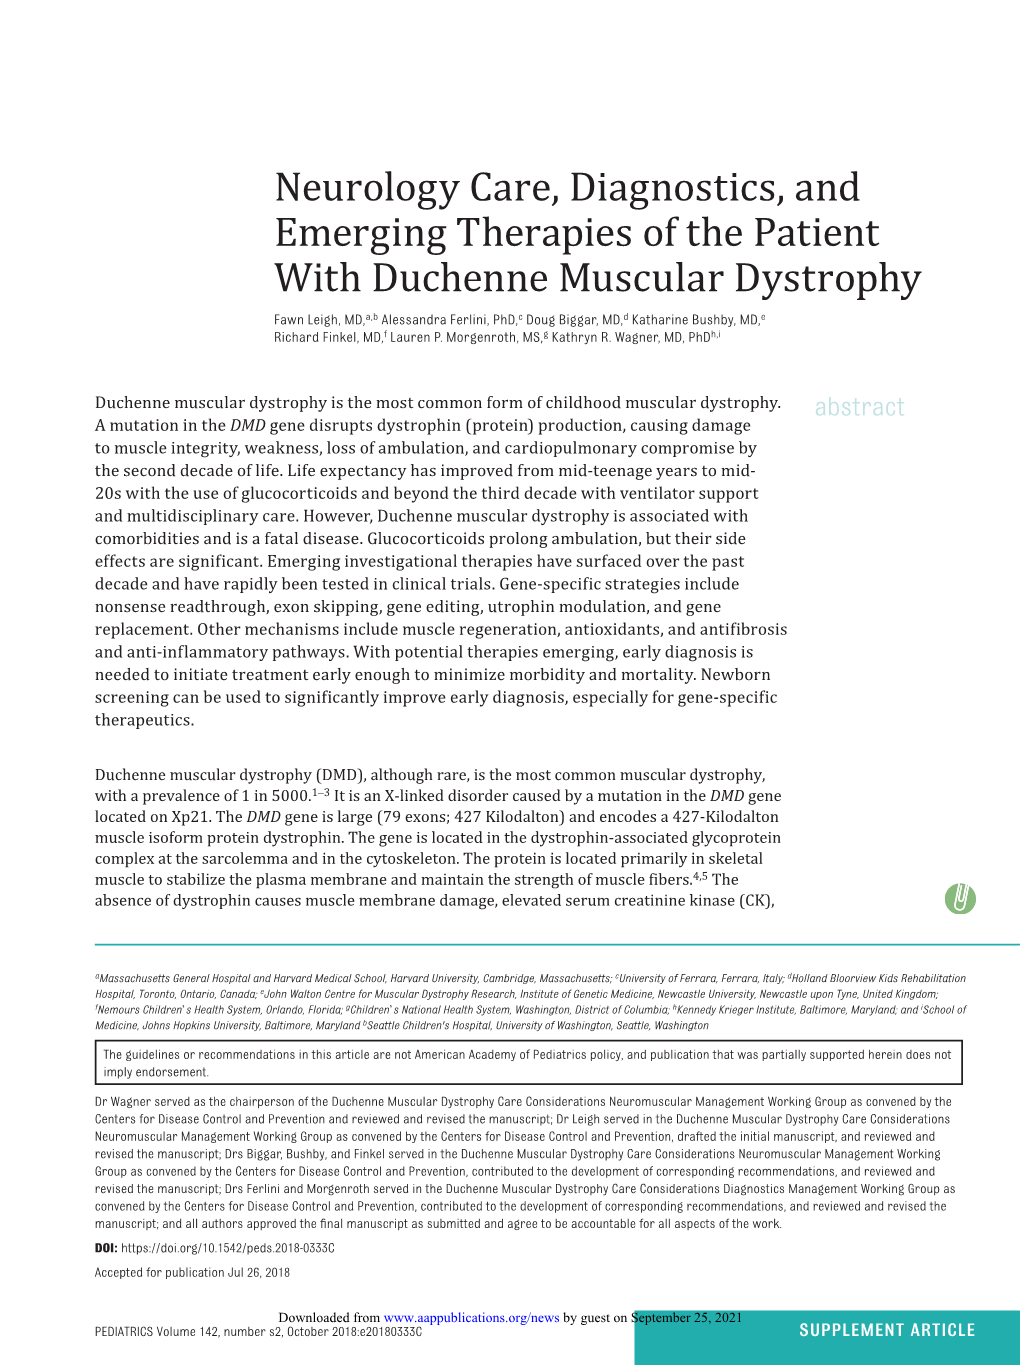 Neurology Care, Diagnostics, and Emerging Therapies of the Patient